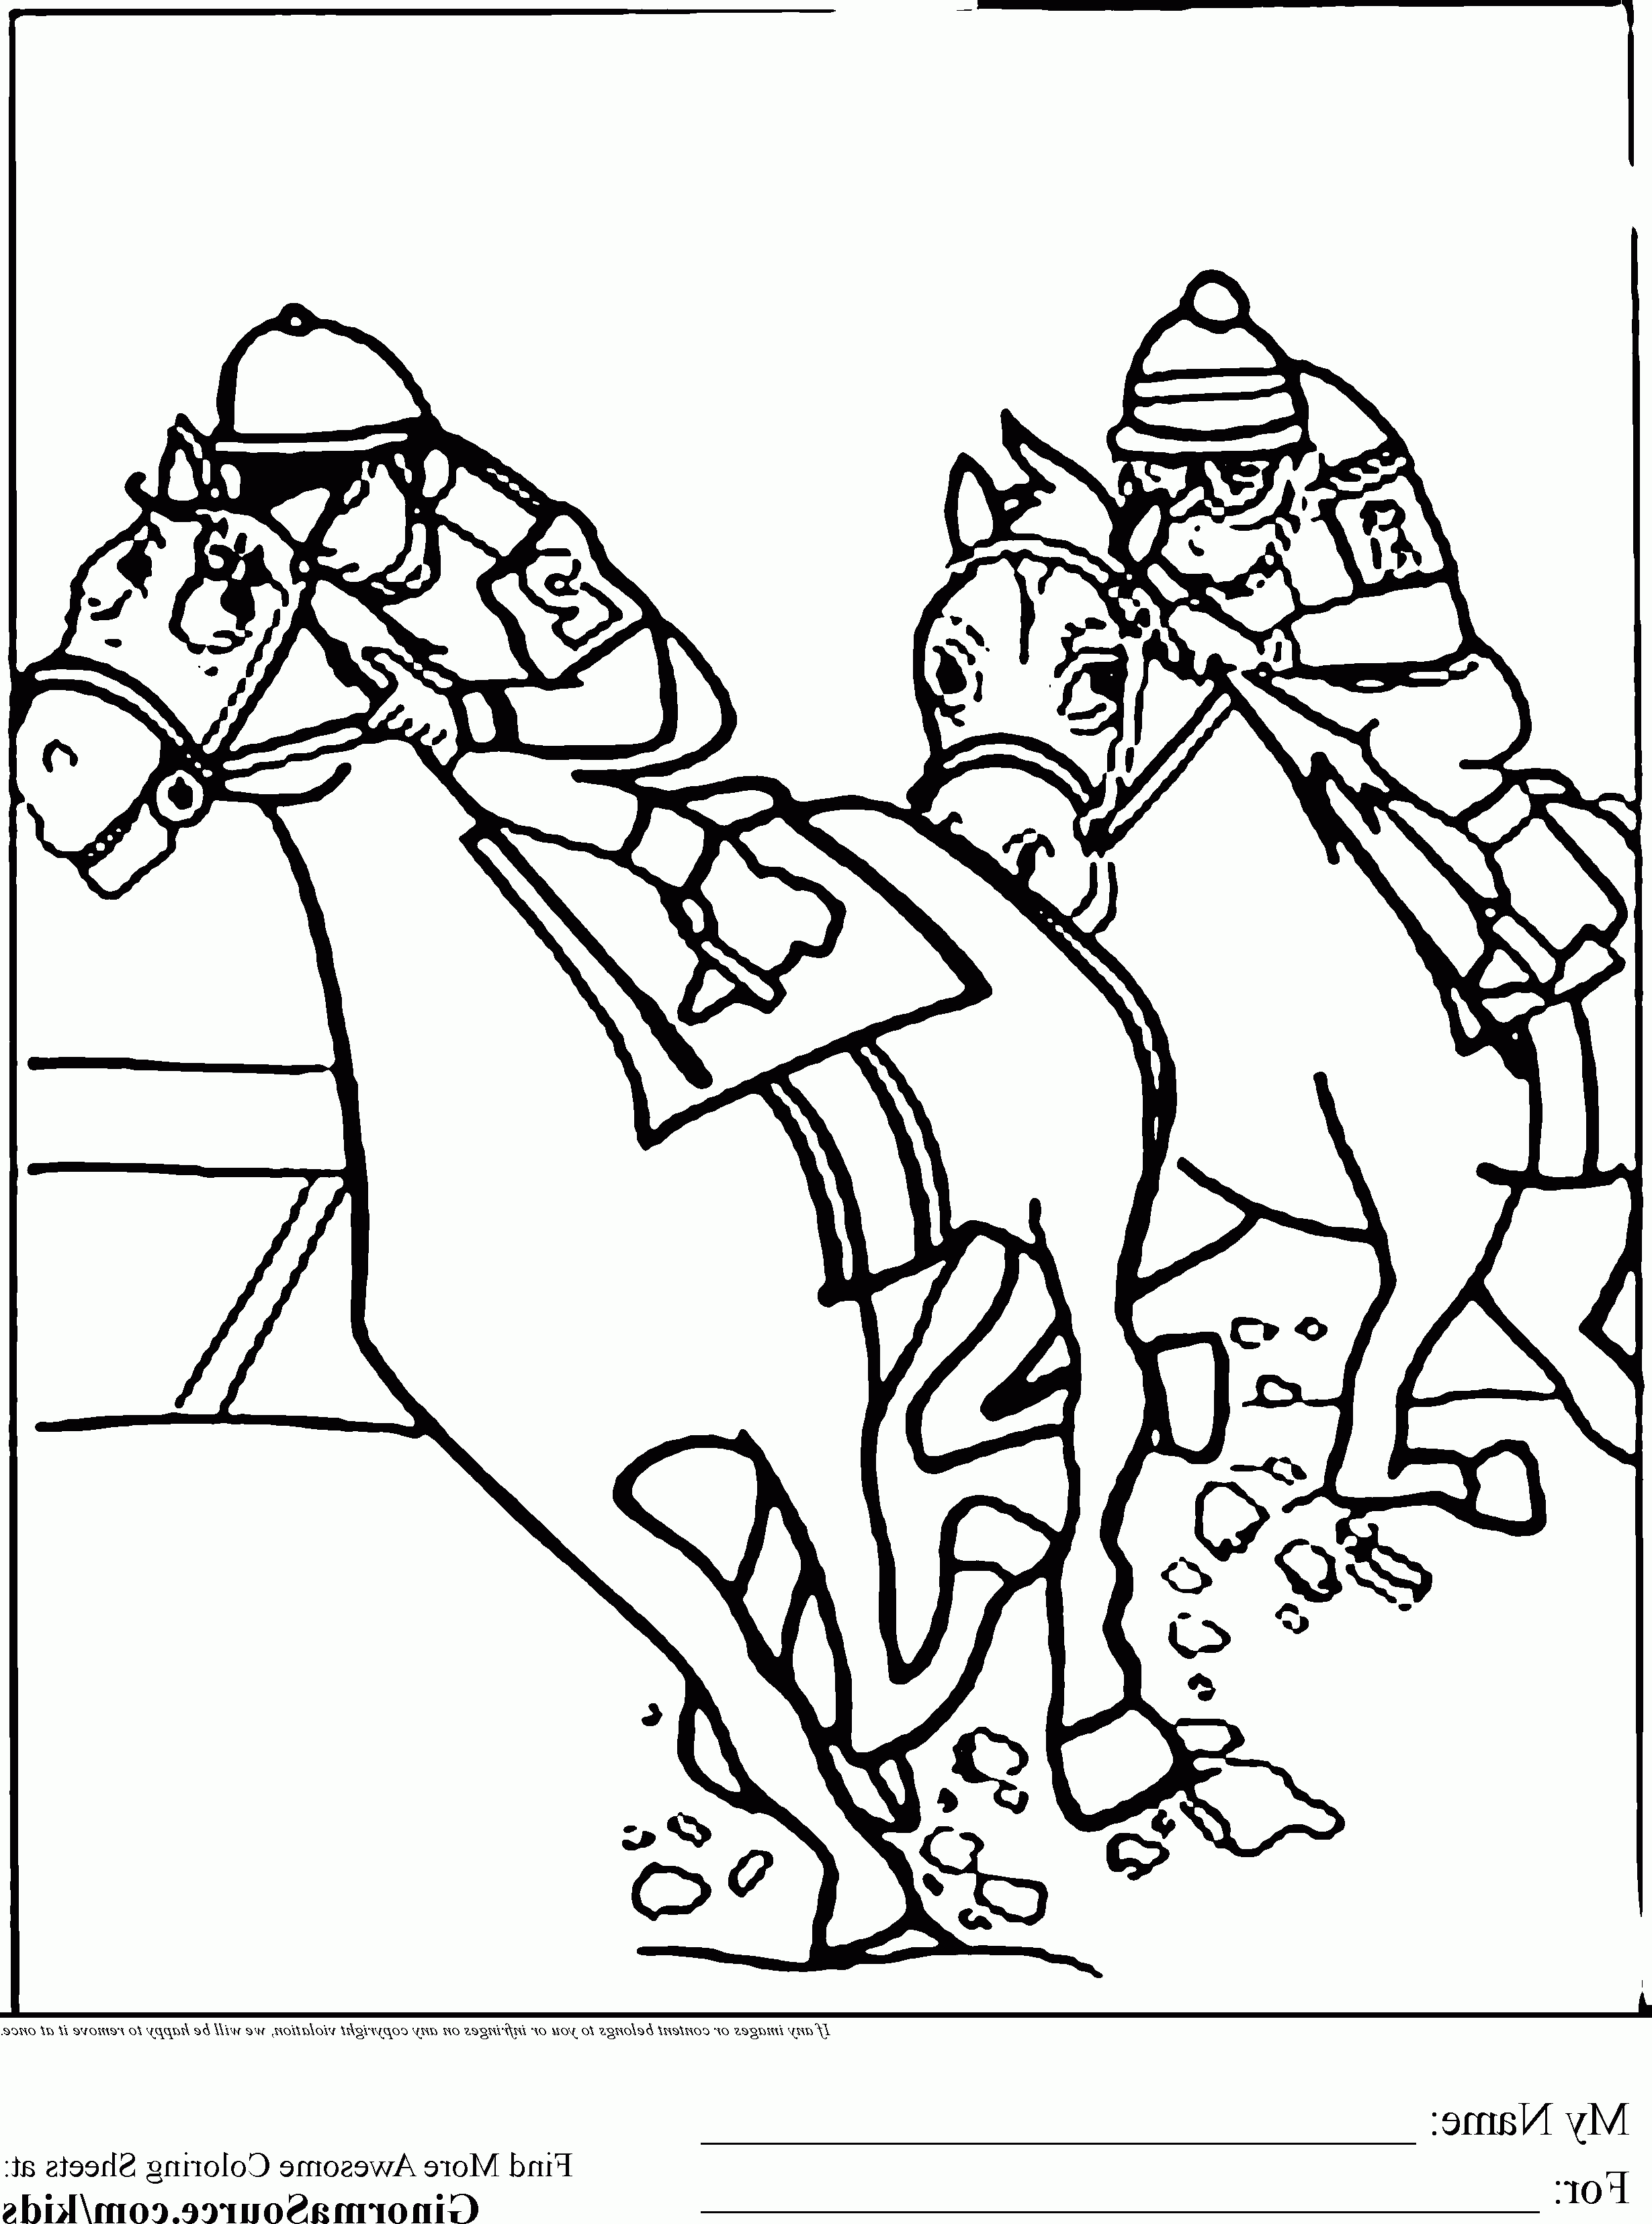 Race Horse Coloring Page - Coloring Home